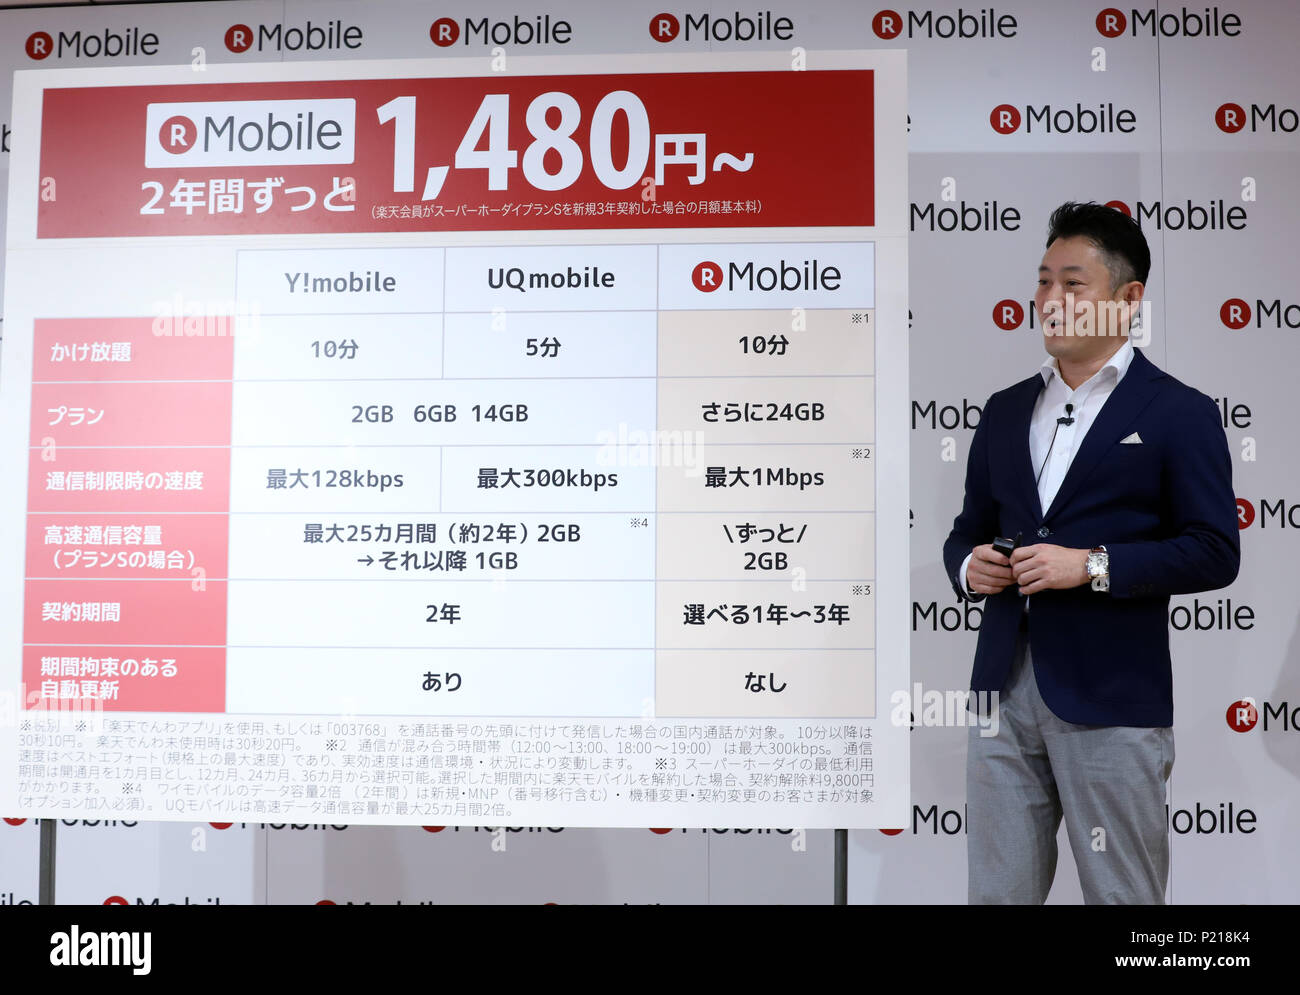 Tokyo, Japan. 14th June, 2018. Japan's online commerce giant Rakuten's mobile business operating manager Hiroto Ooka announces the new price plan for their MVNO service at the Rakuten headquarters in Tokyo on Thursday, June 14, 2018. Credit: Yoshio Tsunoda/AFLO/Alamy Live News Stock Photo